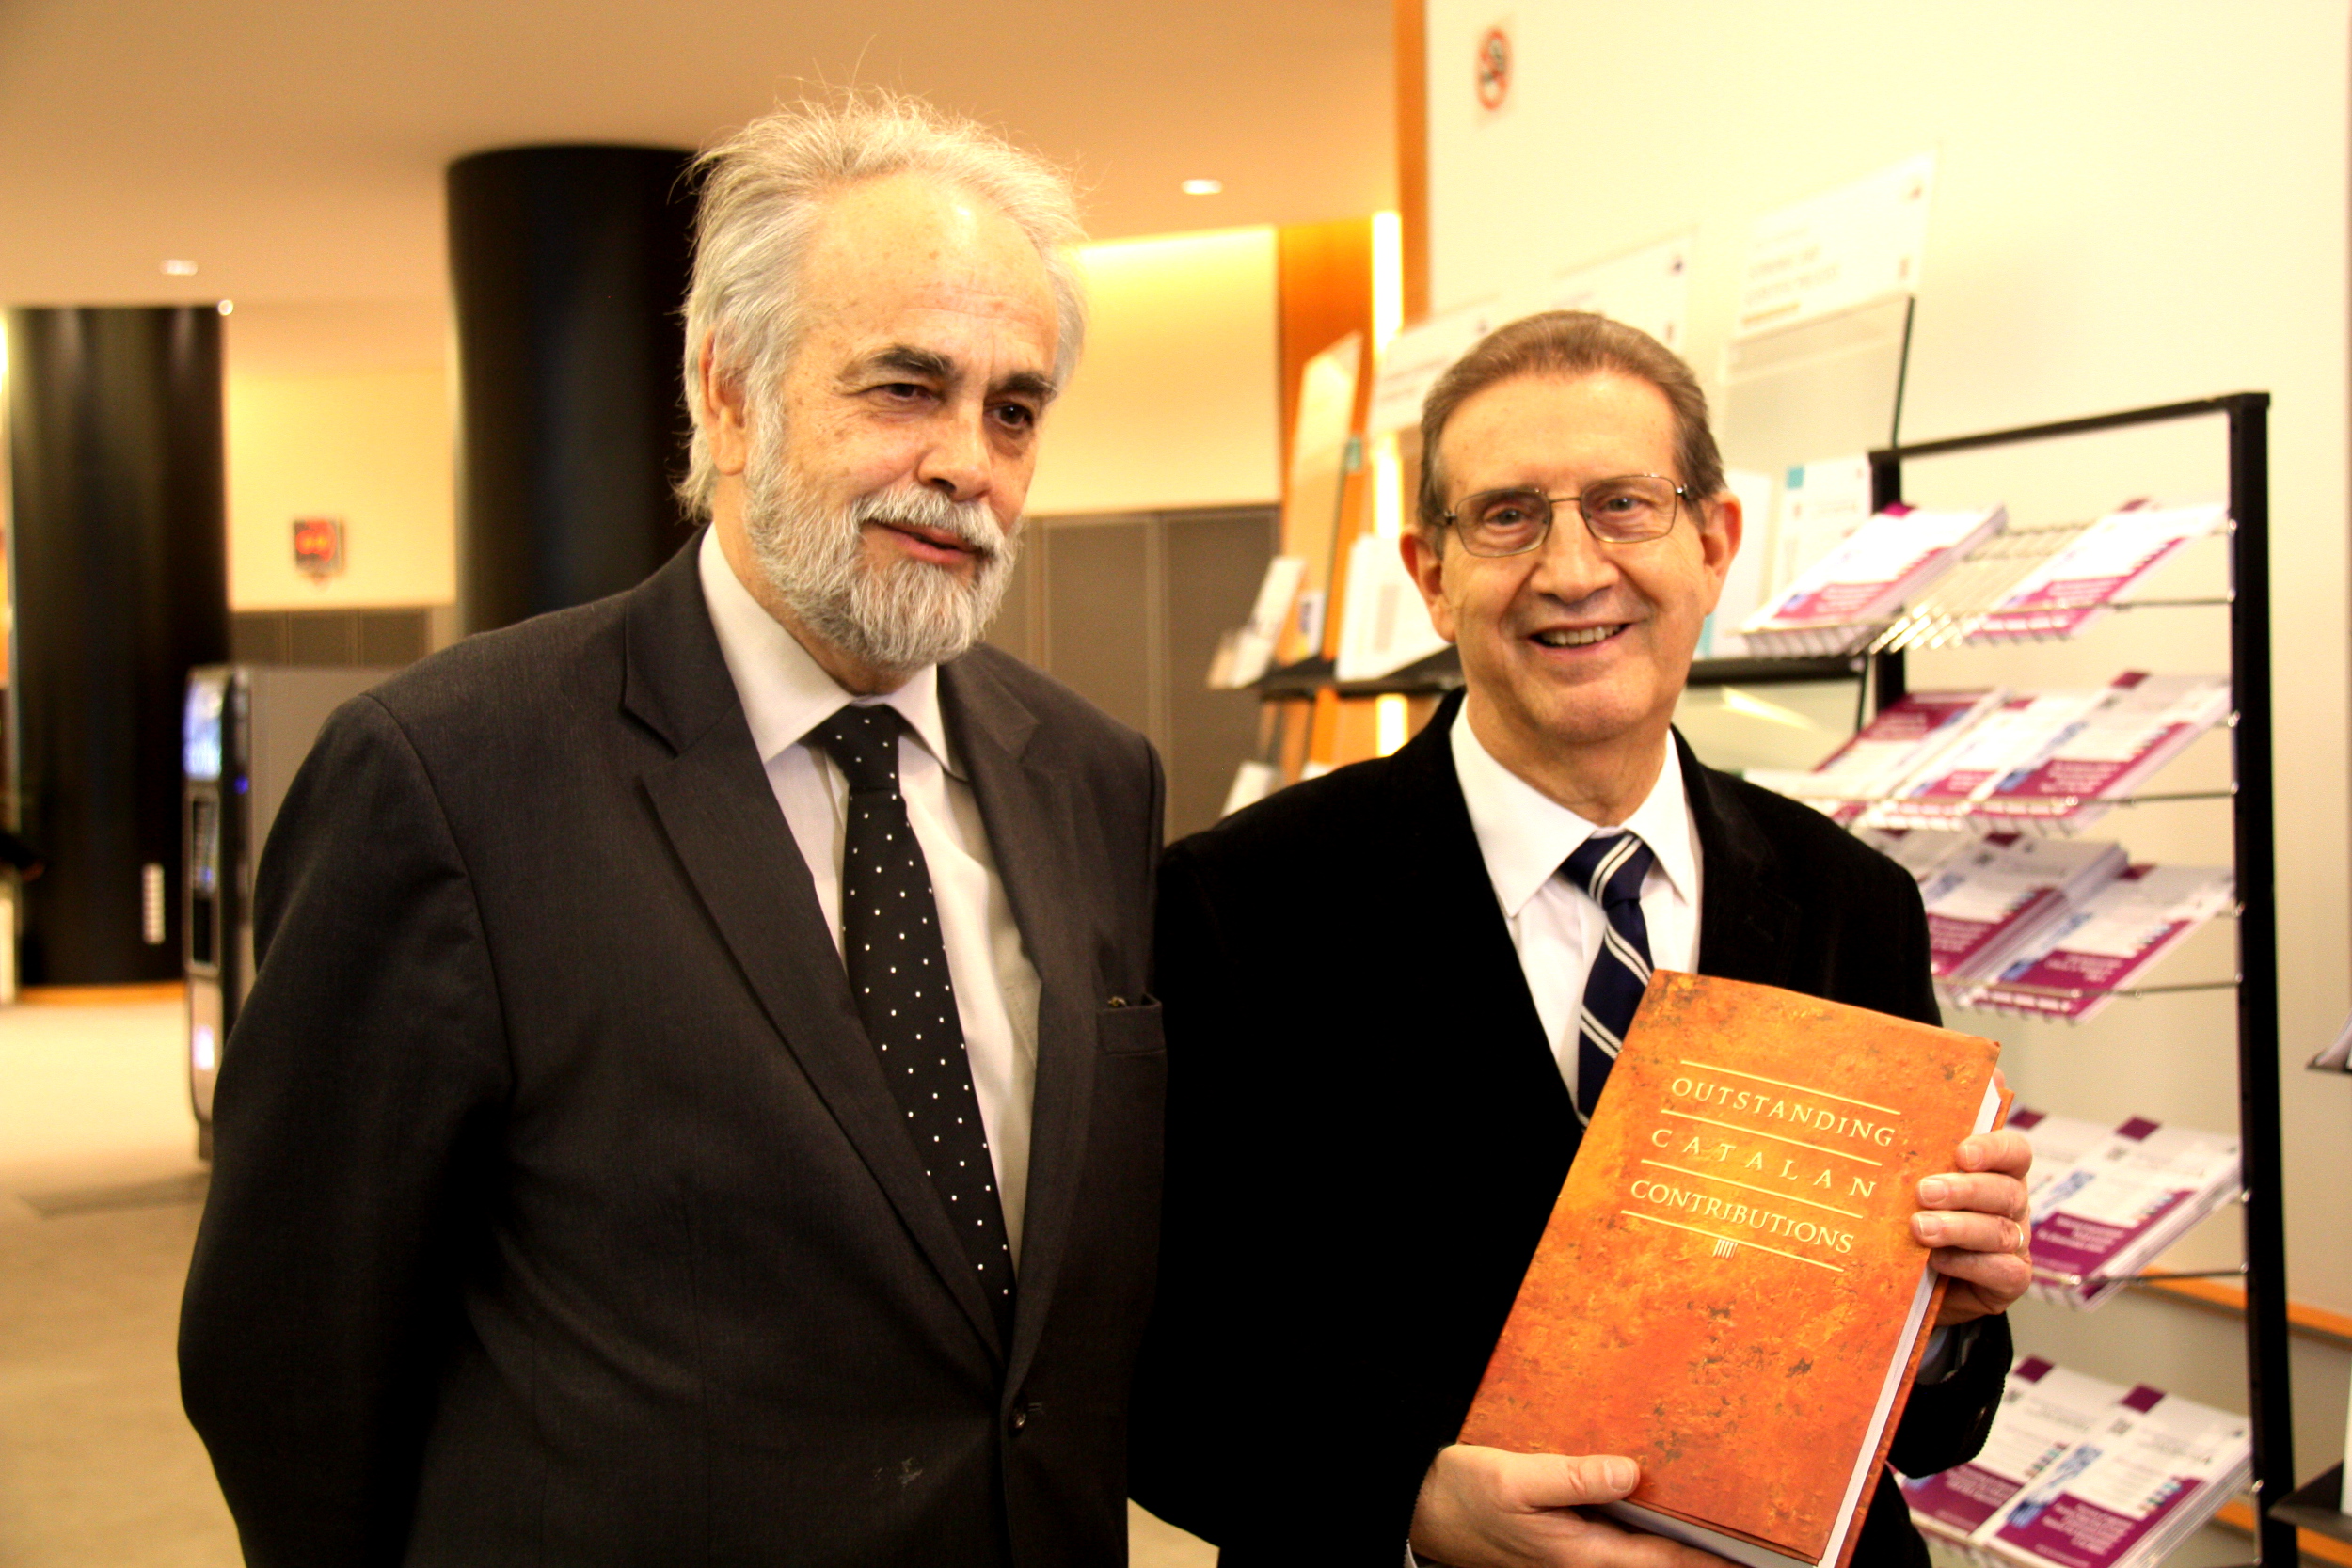 The author 'Universal Catalan Contributions', cultural promoter Joan Amorós and Ramon Mir (by ACN)